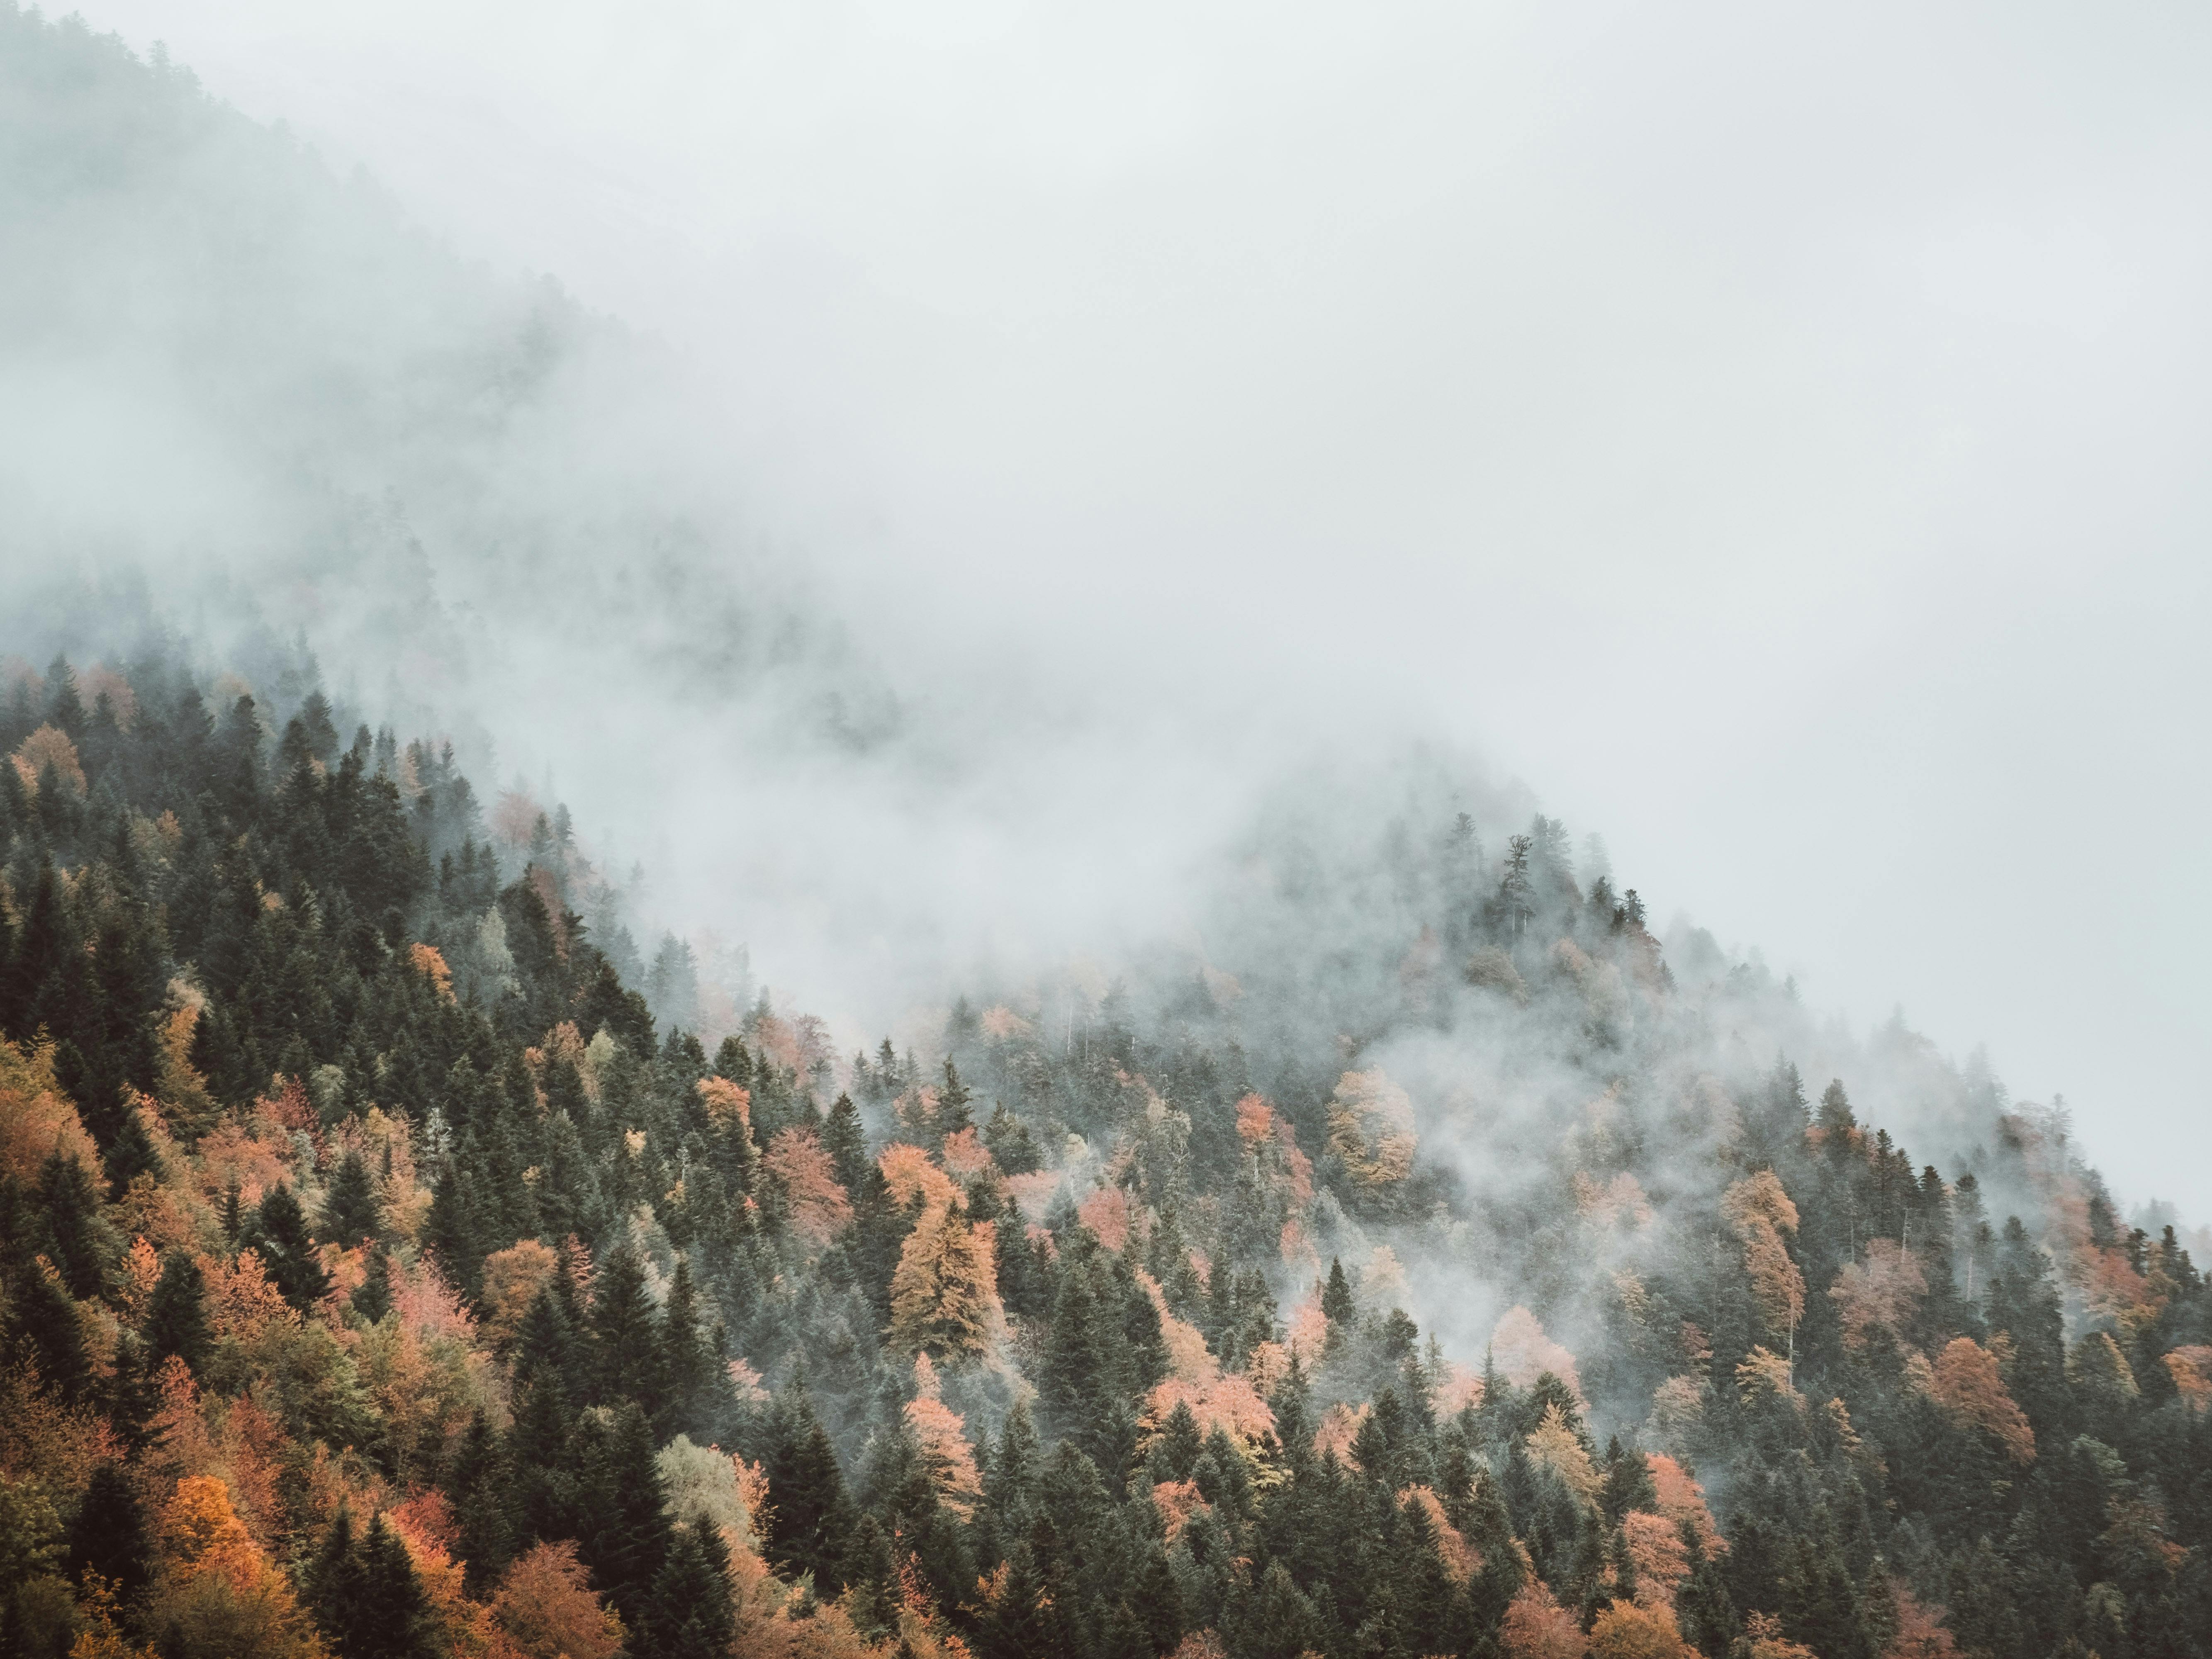 A forest filled with lots of trees under a cloudy sky photo – Free Grey  Image on Unsplash